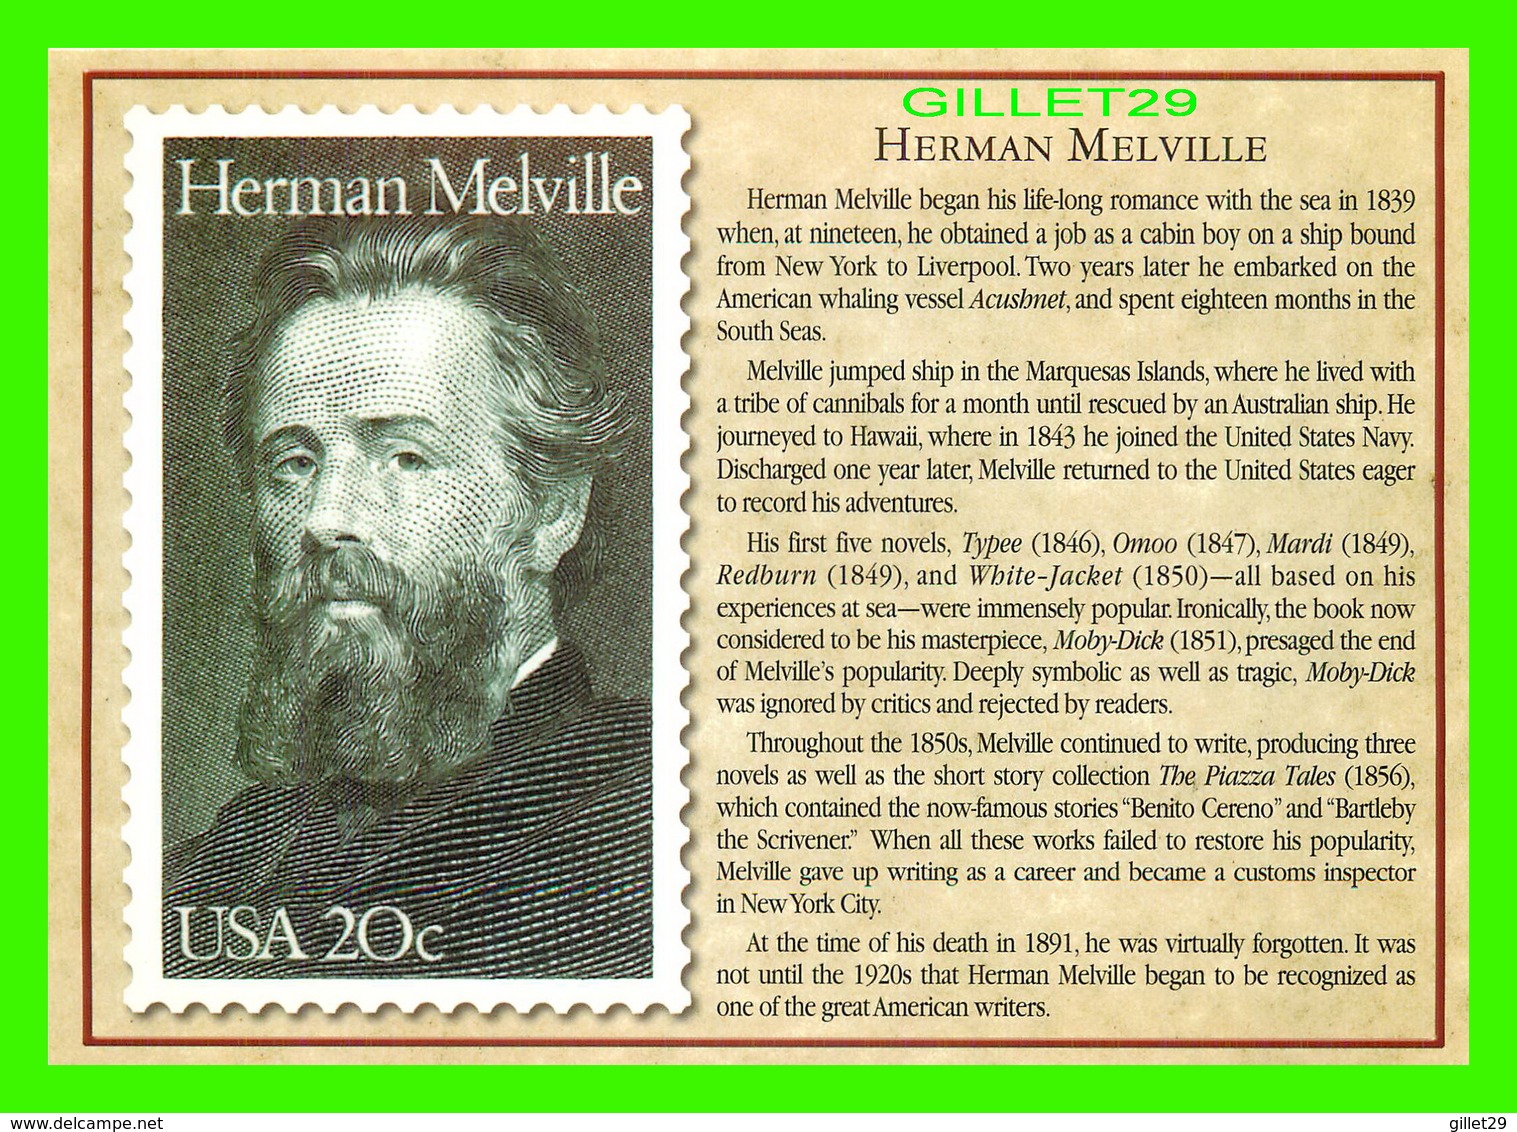 TIMBRES REPRÉSENTATIOINS - GREAT AMERICAN WRITERS, HERMAN MELVILLE (1819-1891) - STAMP ISSUE DATE,1984 - Stamps (pictures)